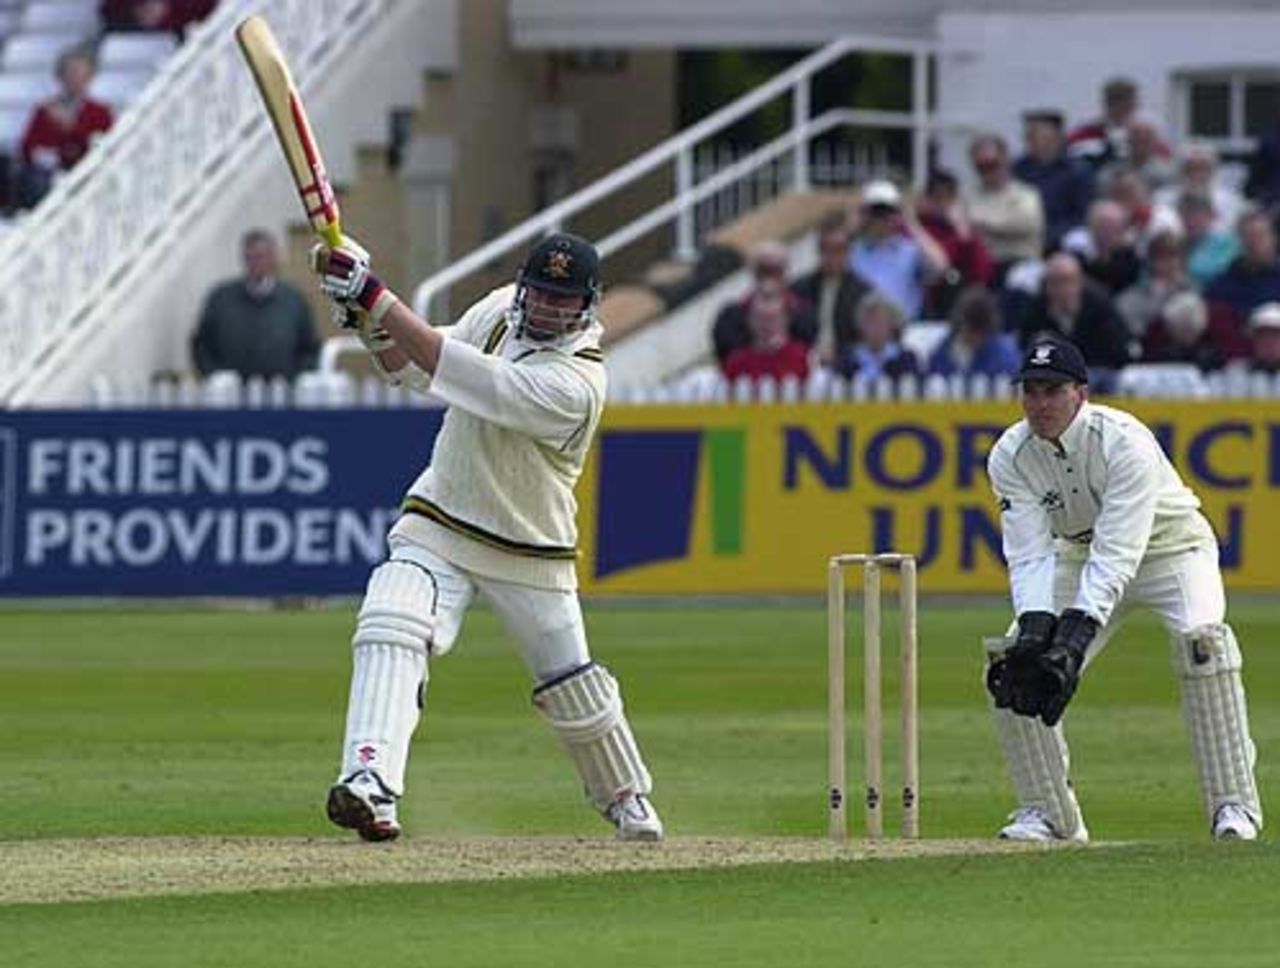 Lance Klusener hits out in the Notts innings